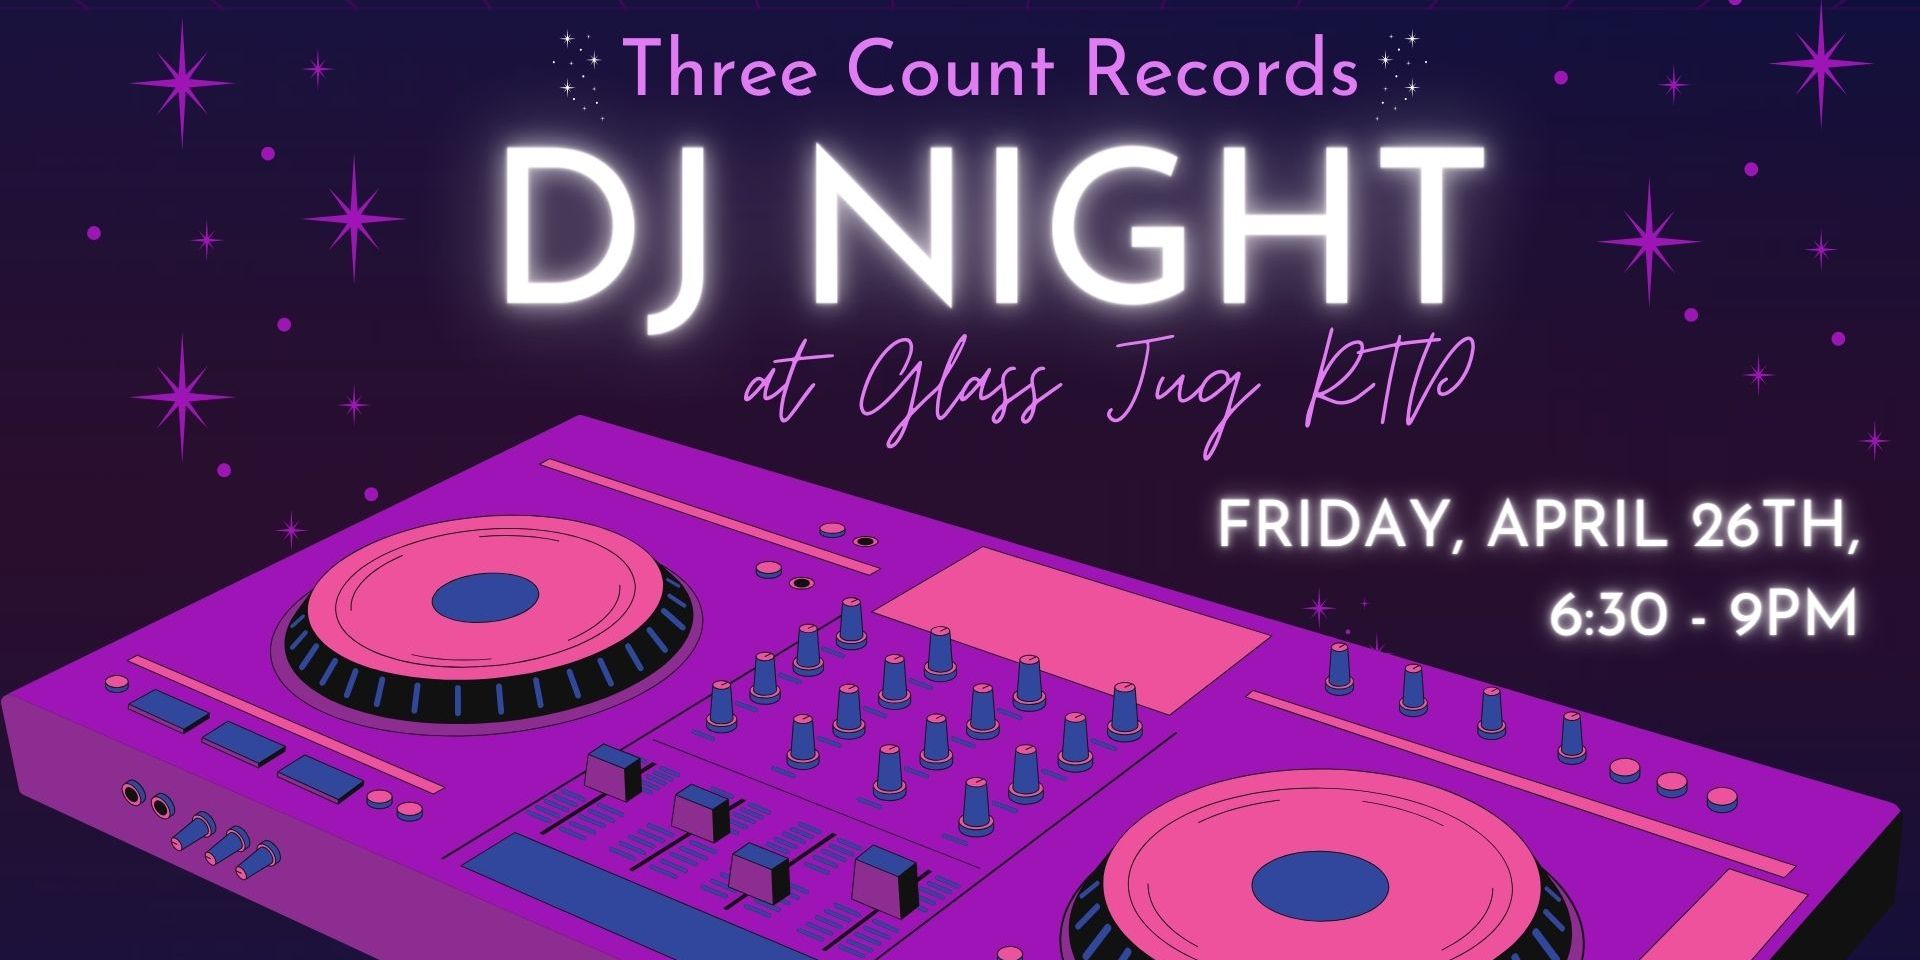 DJ Night with Three Count Records promotional image